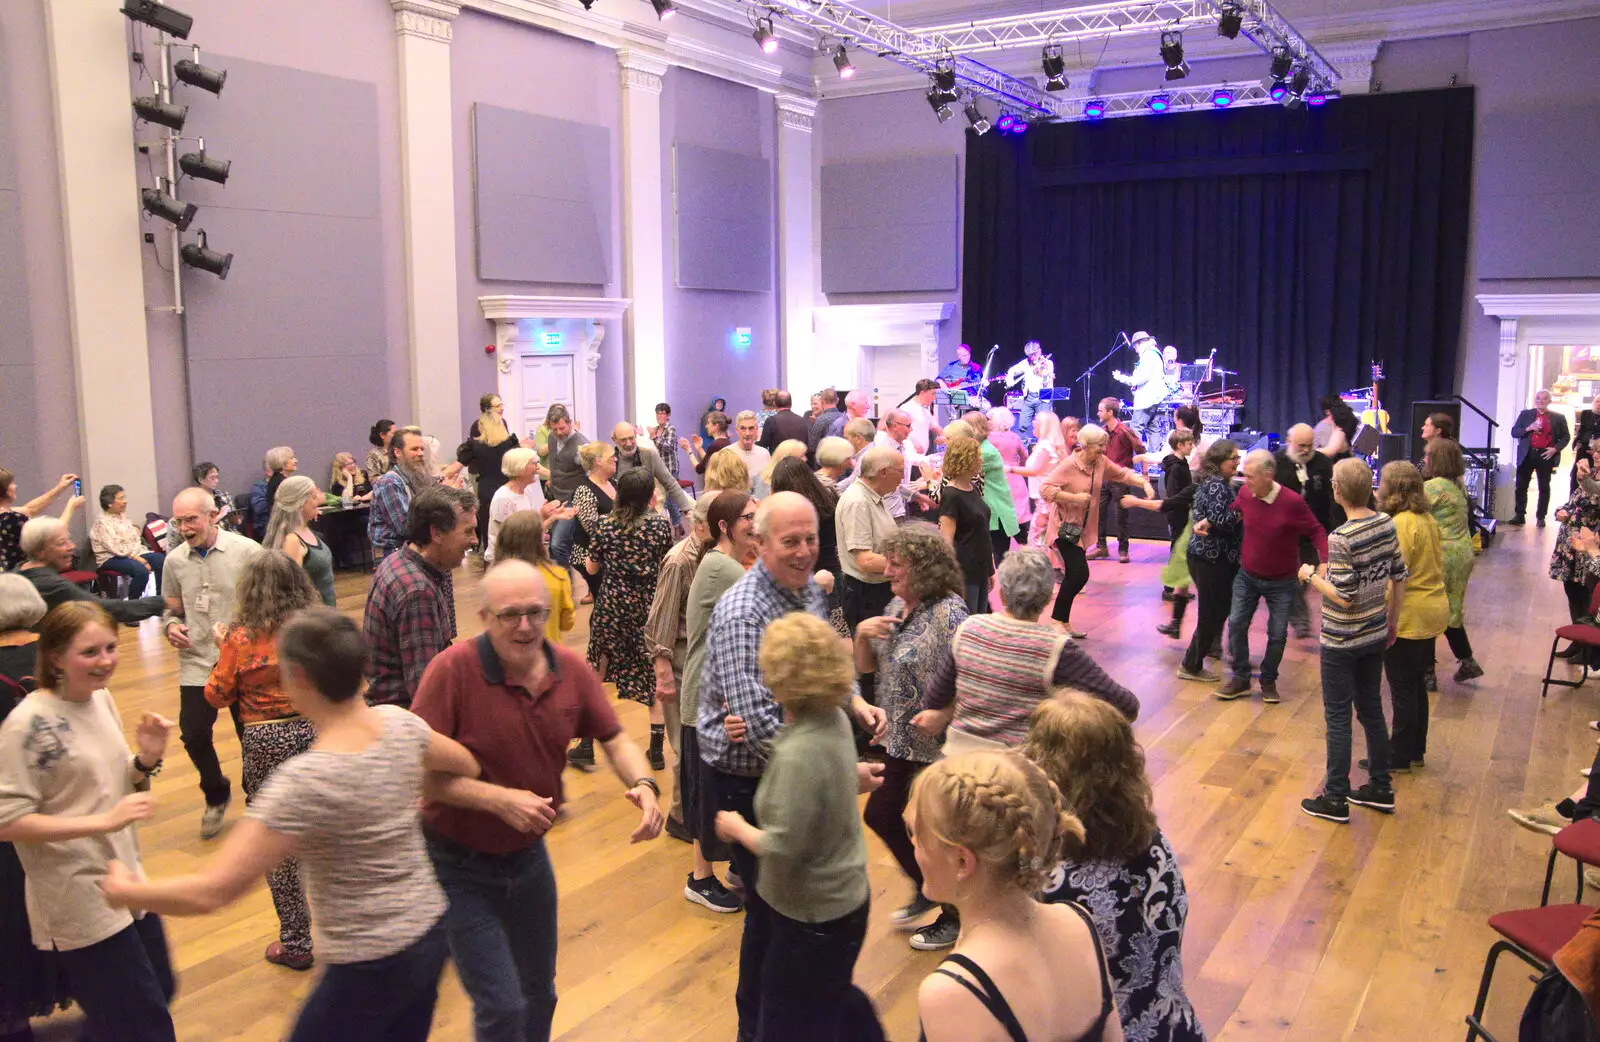 The scene in the Cornhall, from DesignerMakers' Fund-Raising Ceilidh, The Cornhall, Diss - 13th May 2023